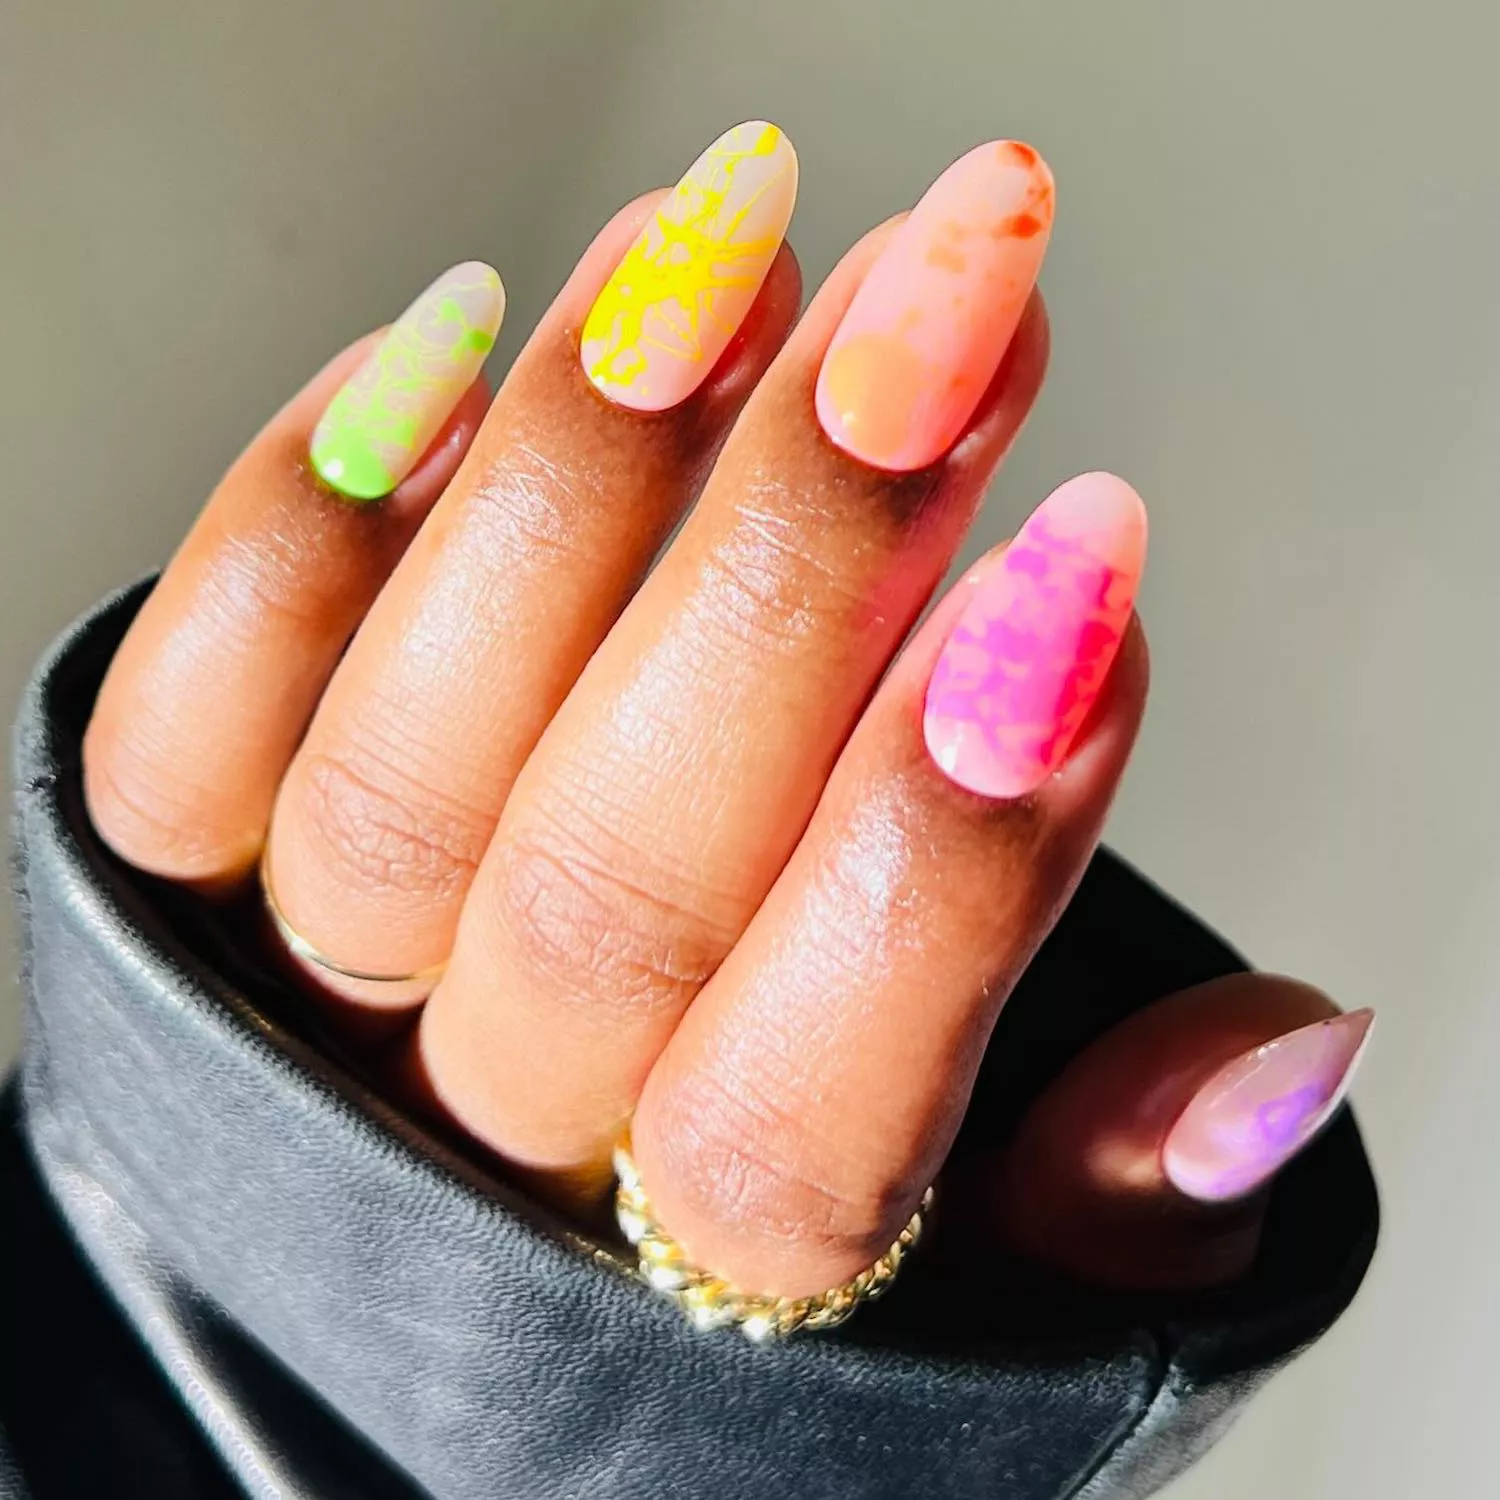 Manicure with translucent neutral base and multicolored neon splatter designs